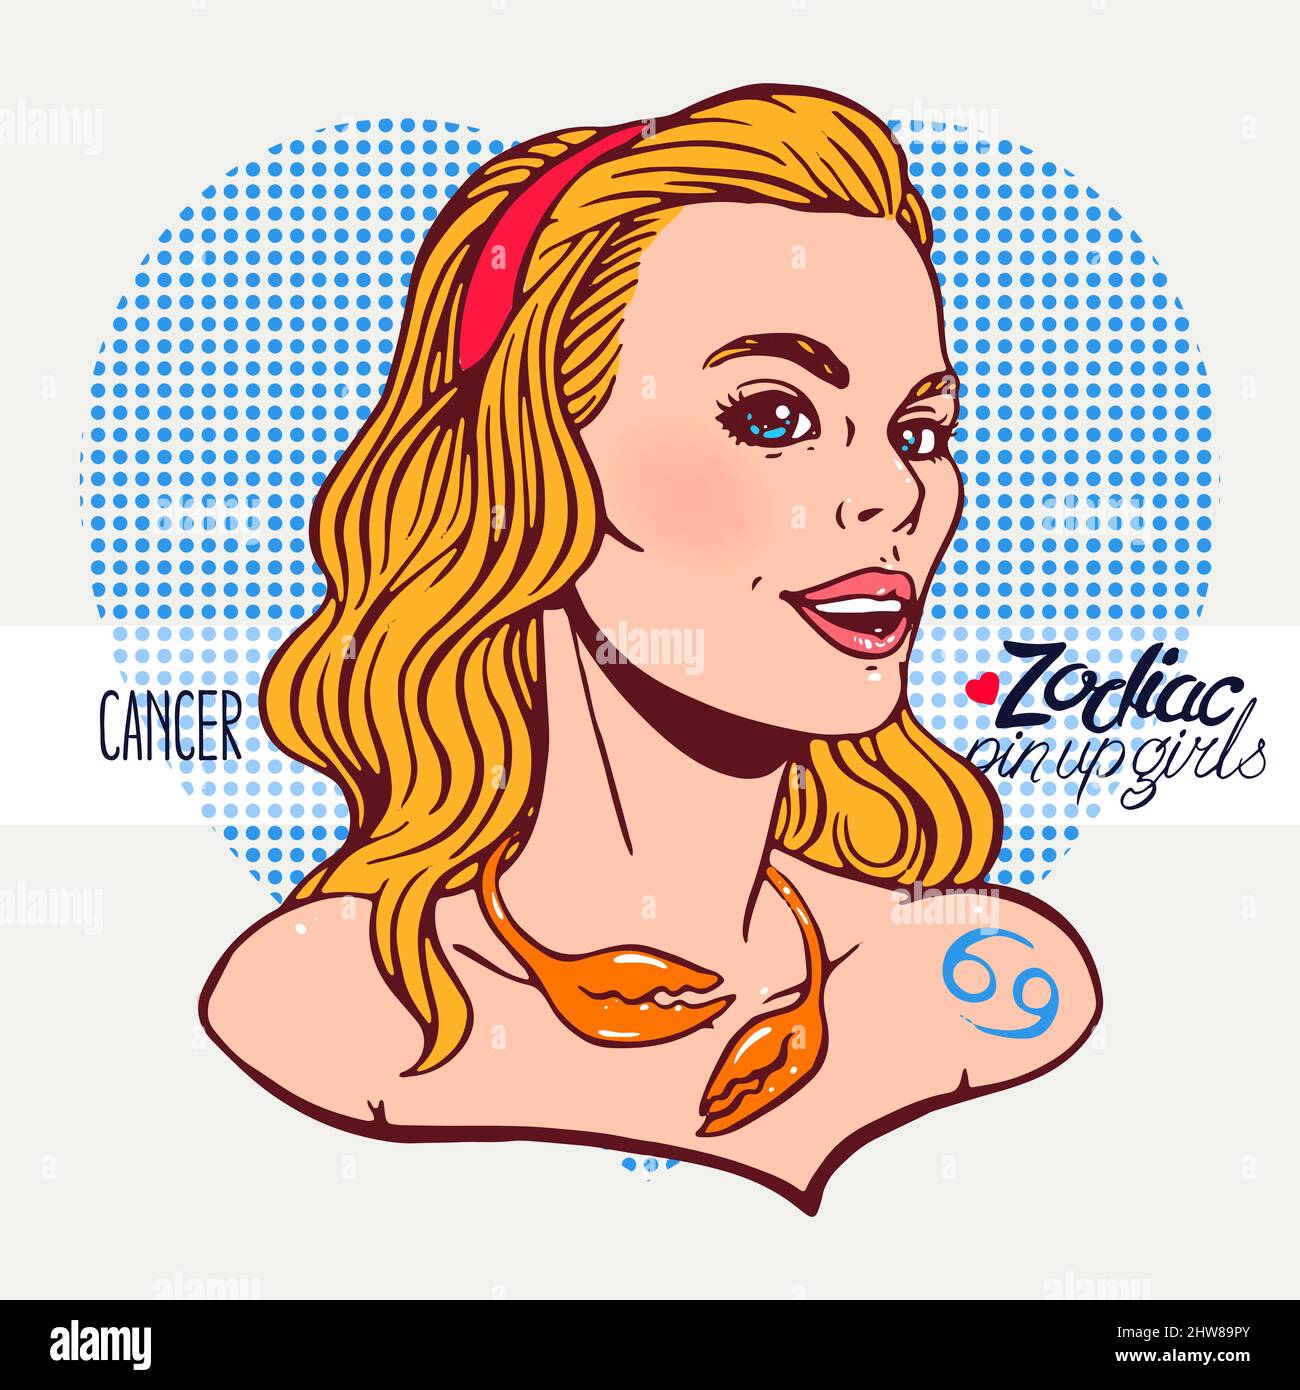 Zodiac signs - Cancer as a girl in the style of pin-up. Hand-drawn illustration Stock Vector